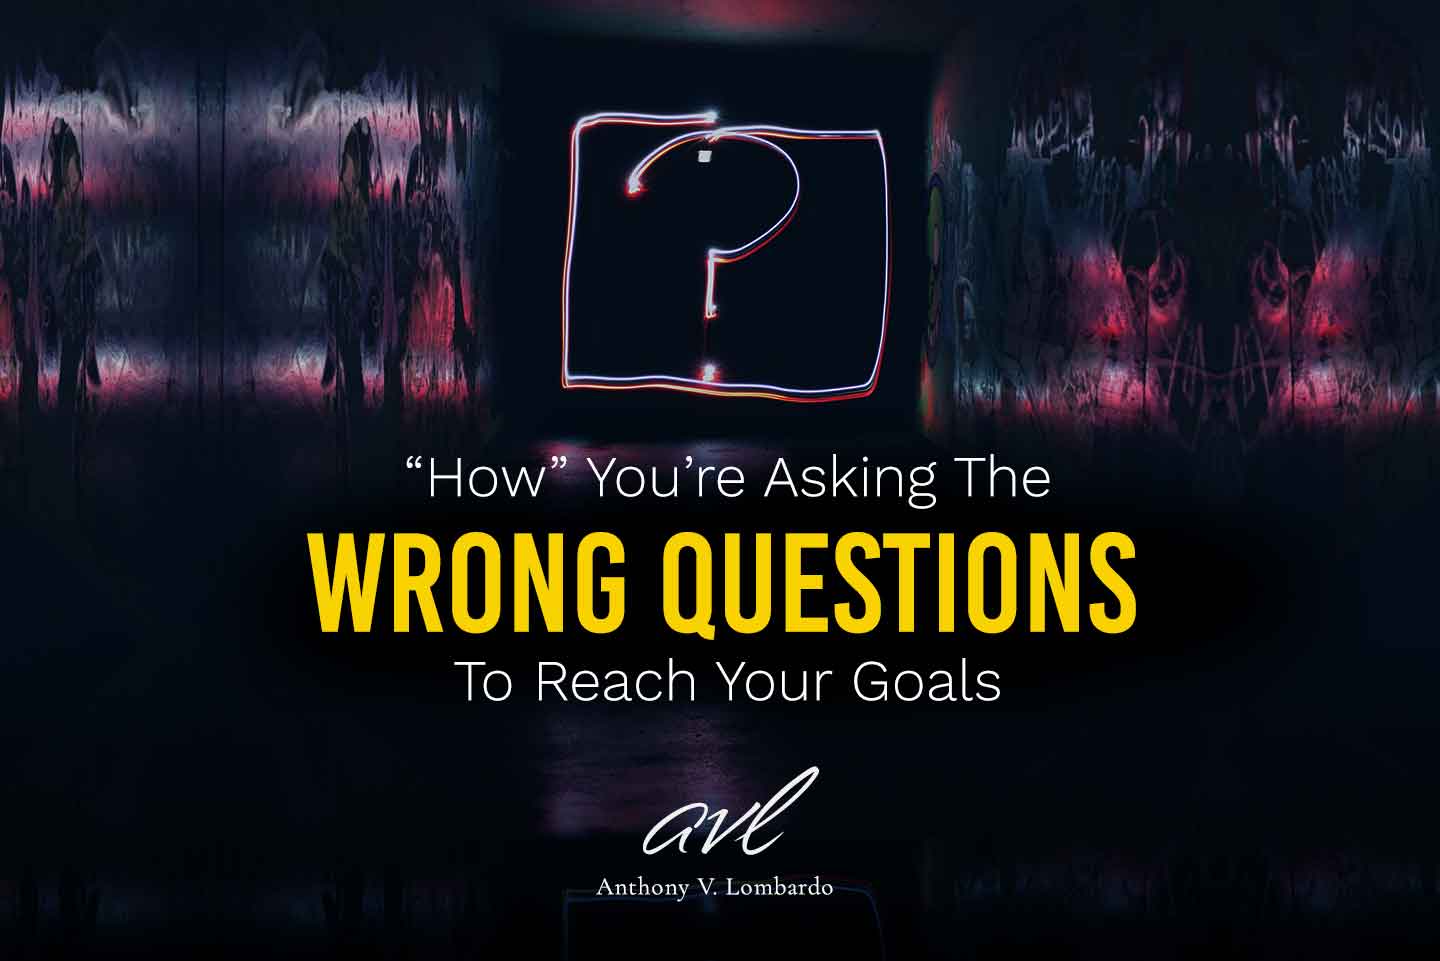 How You’re Asking The Wrong Questions About Achieving Your Goals